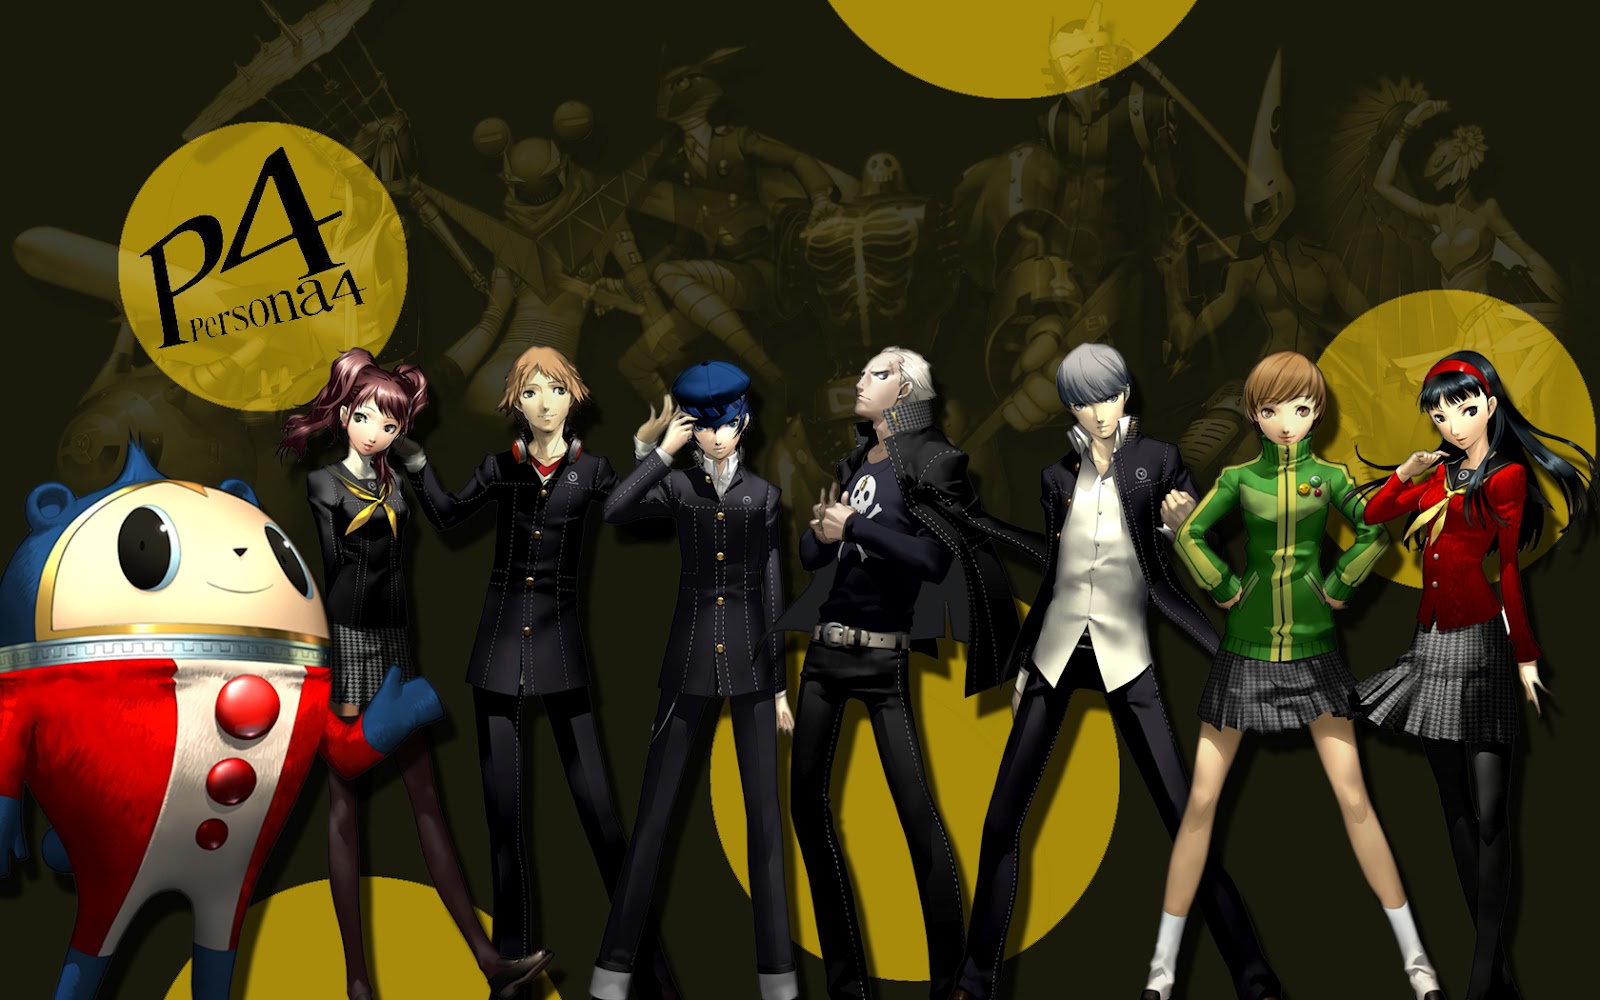 Persona The Animation